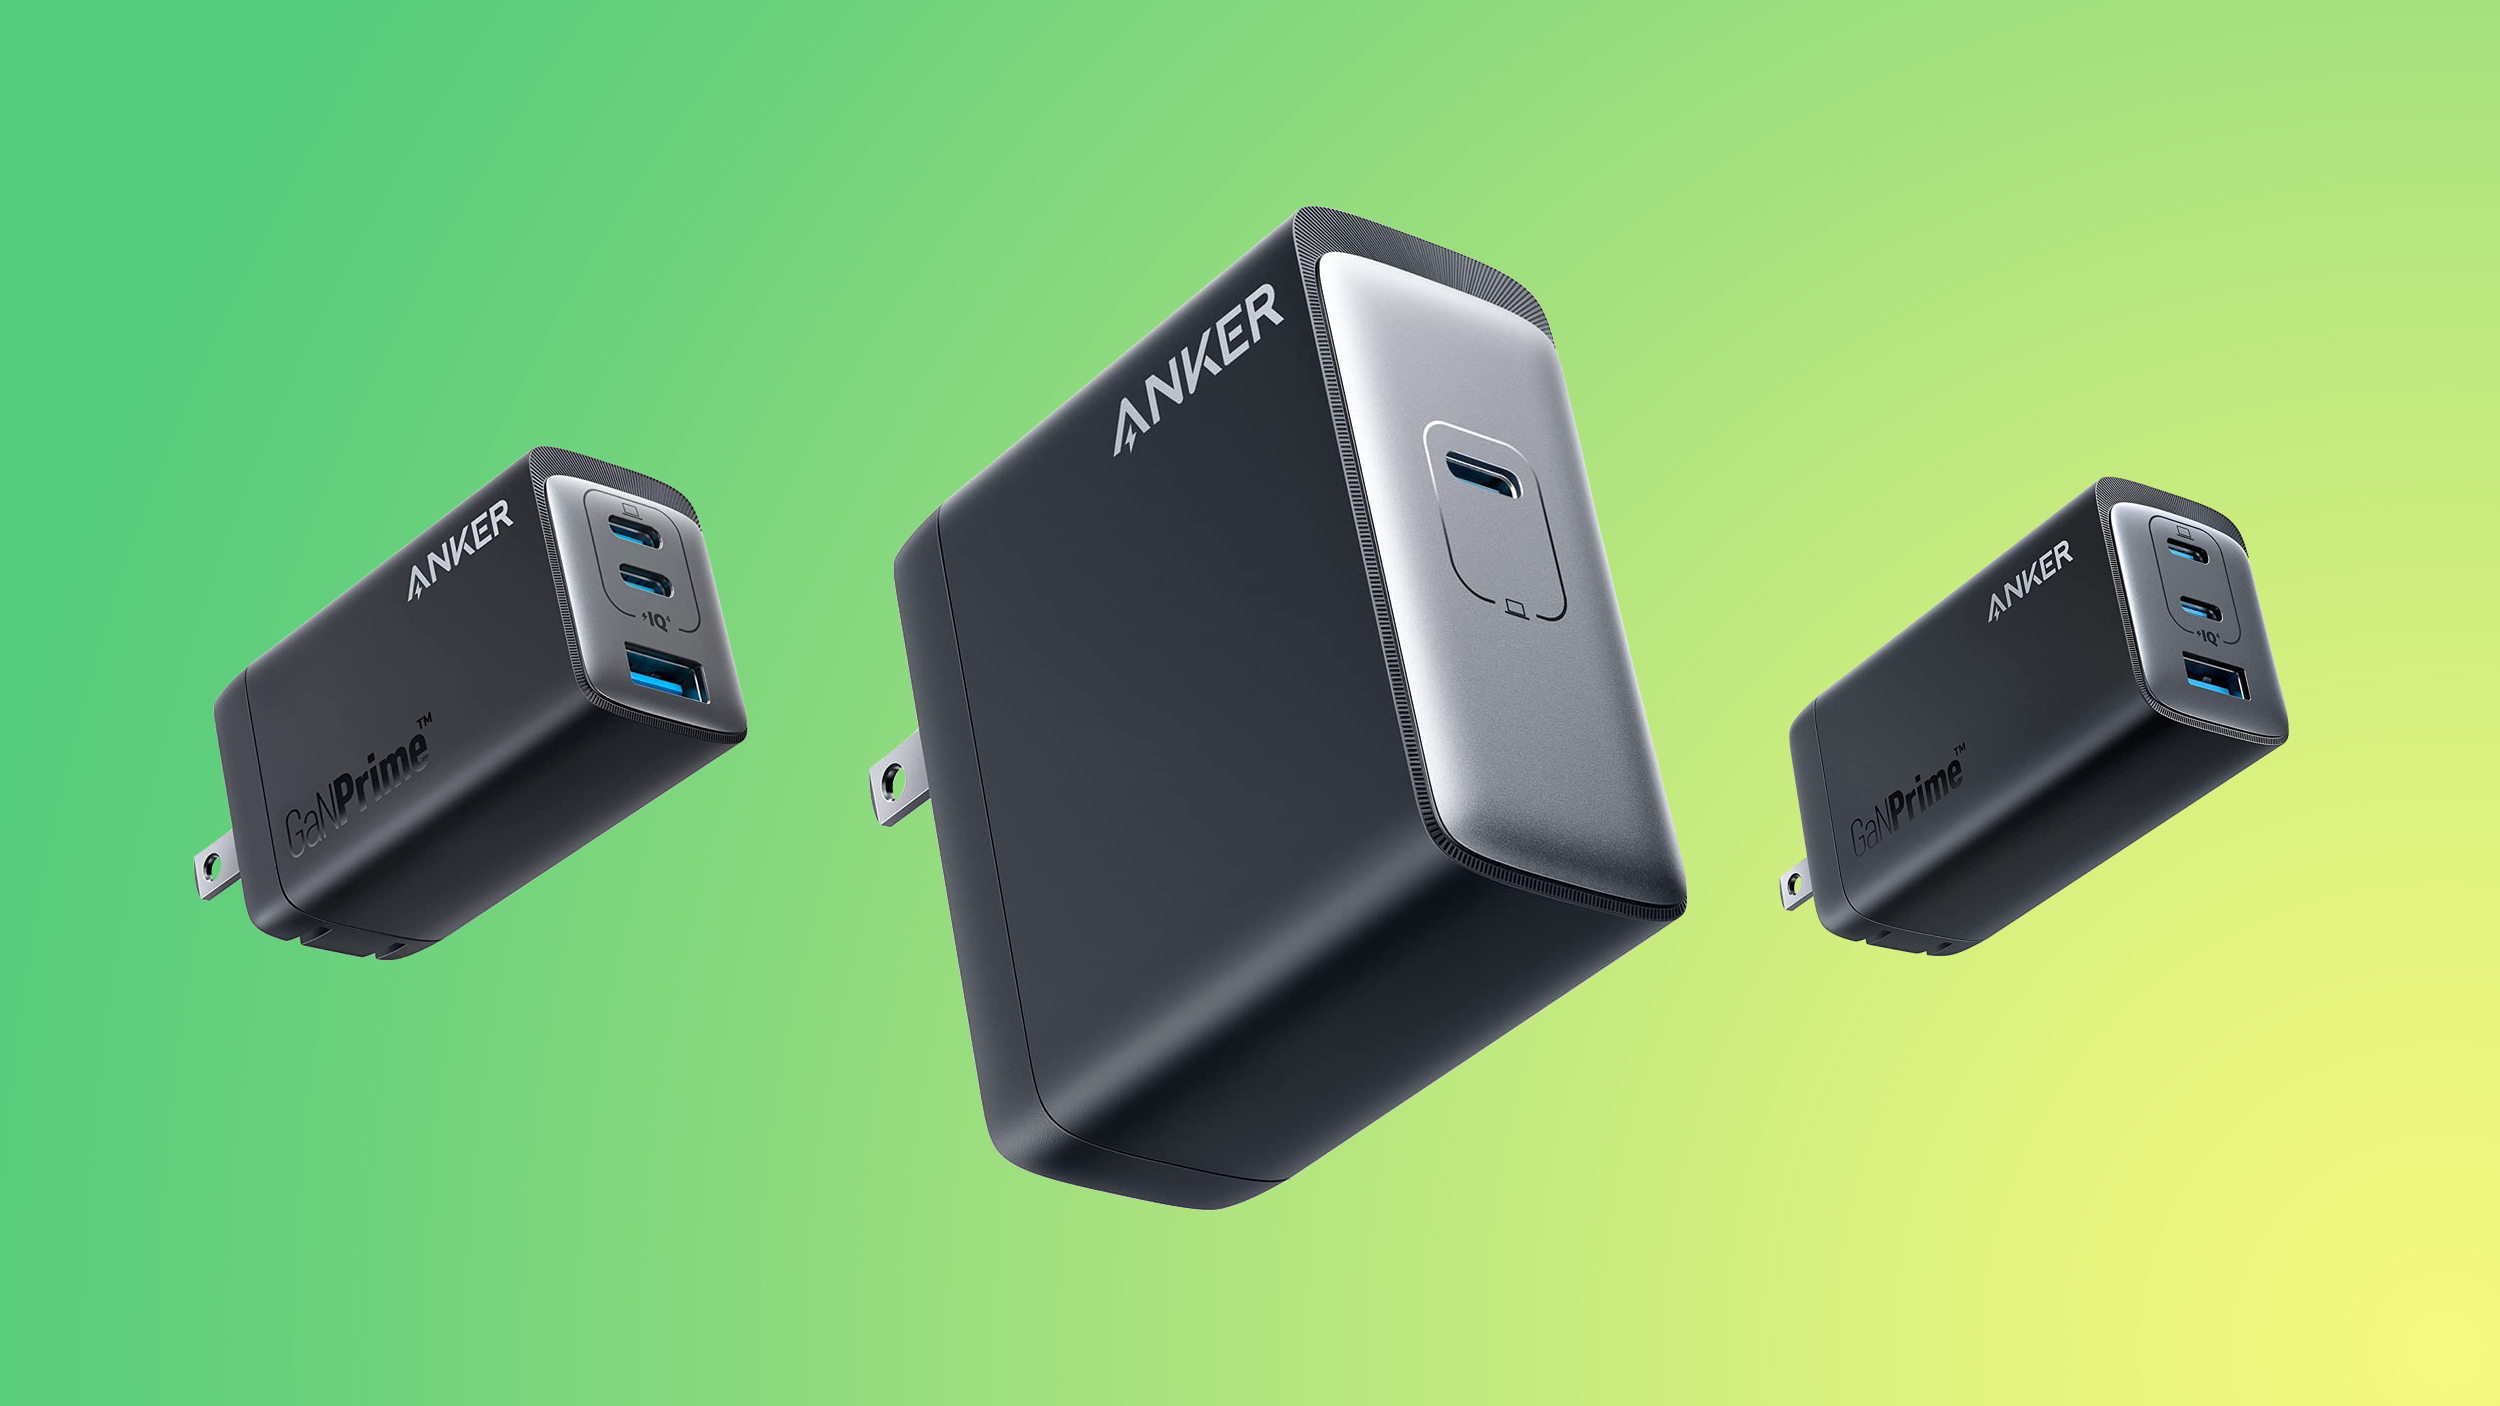 Deals: Take Up to 25% Off Anker’s New USB-C Wall Chargers